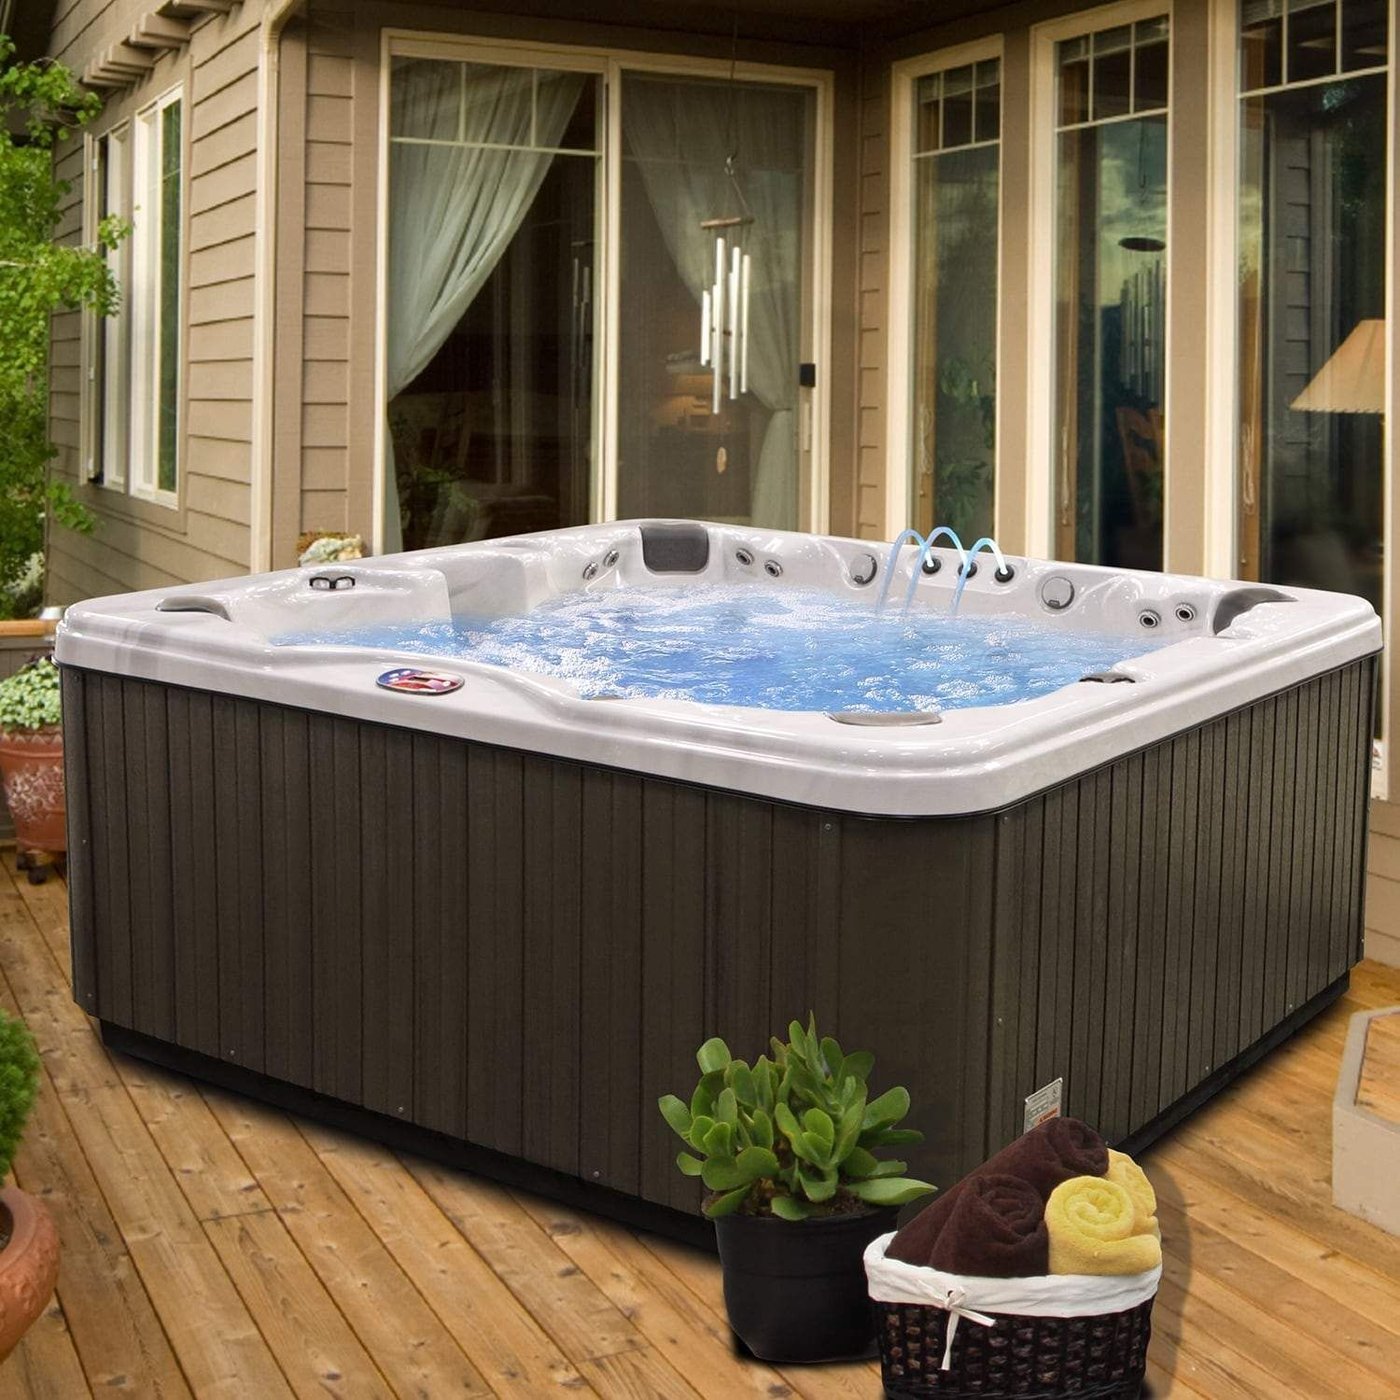 How To Choose A Hot Tub - Foter